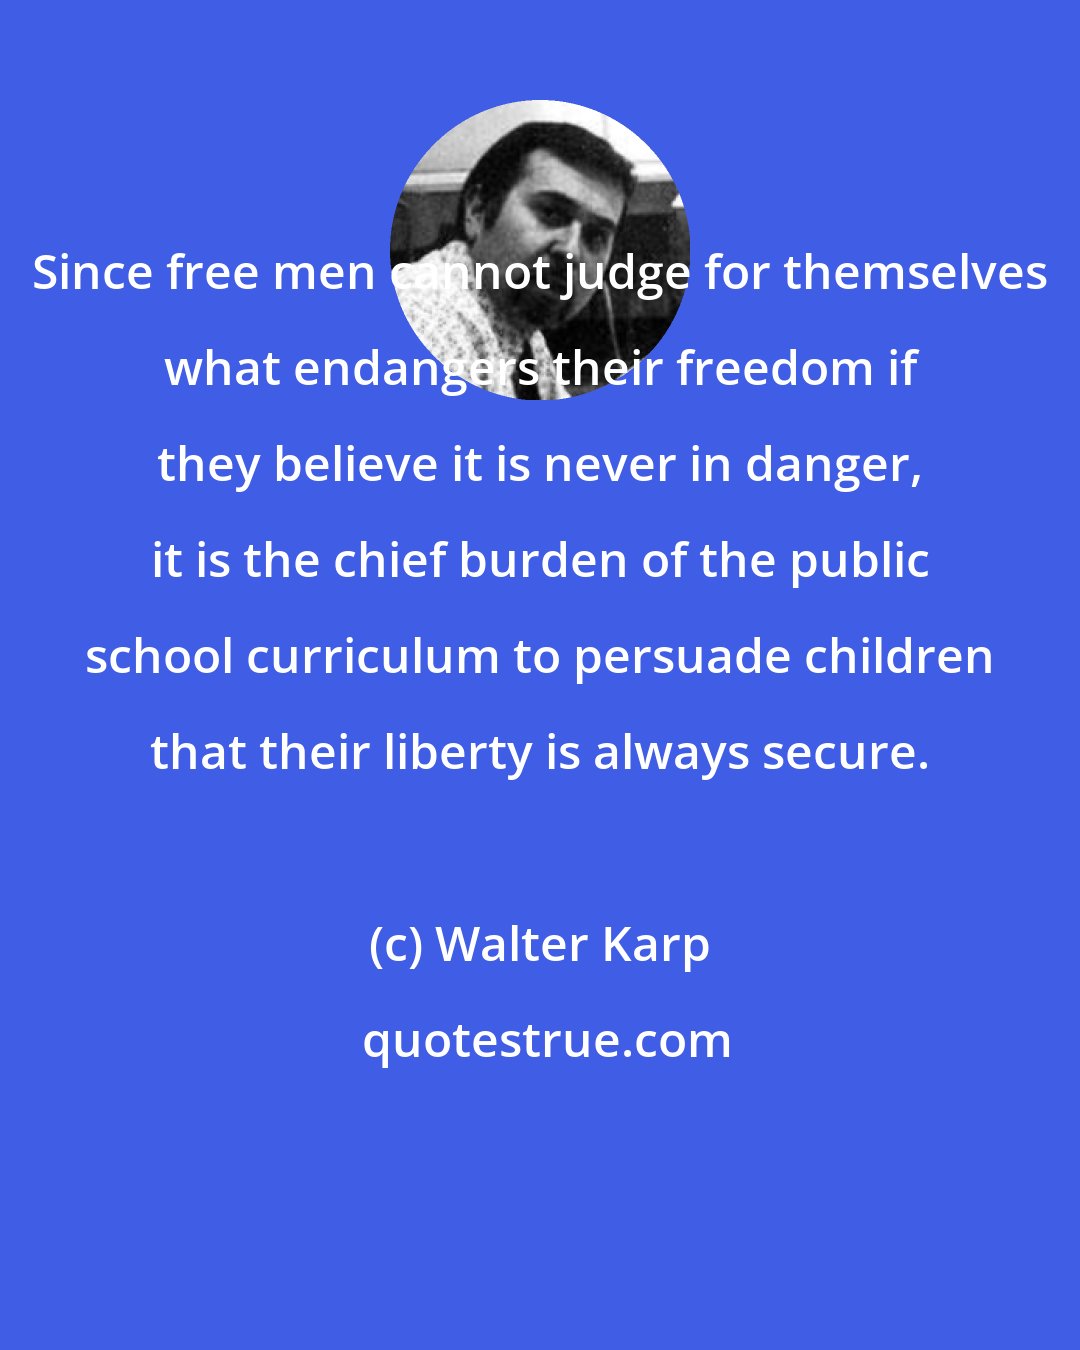 Walter Karp: Since free men cannot judge for themselves what endangers their freedom if they believe it is never in danger, it is the chief burden of the public school curriculum to persuade children that their liberty is always secure.